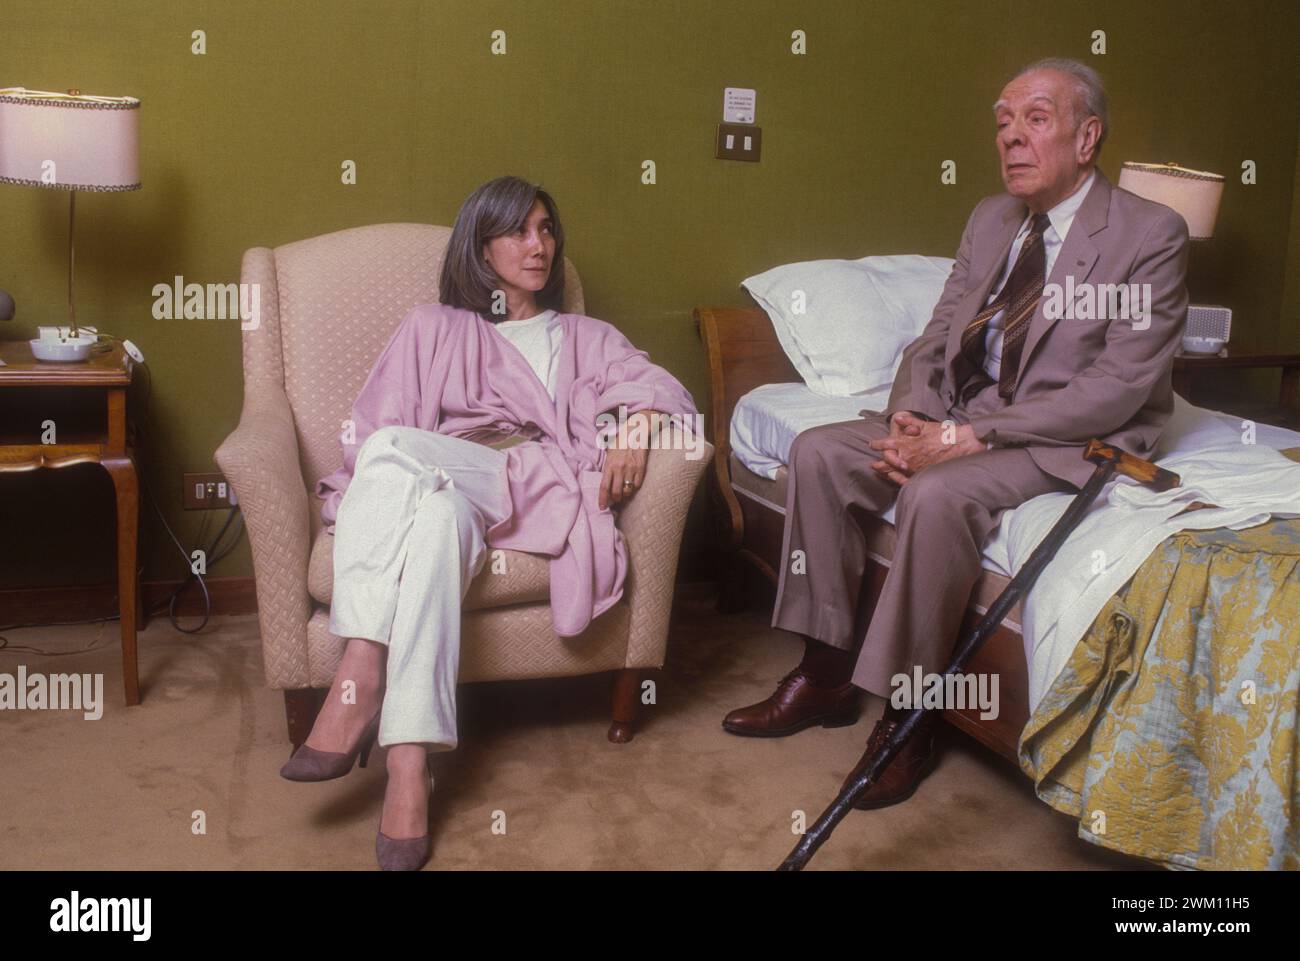 3825319 Jorge Luis Borges; (add.info.: Rome, Westin Excelsior Hotel, 1981. Argentinian writer Jorge Luis Borges and his wife Maria Kodama in their room / Roma, Hotel Westin Excelsior, 1981. Lo scrittore argentino Jorge Luis Borges e sua moglie Maria Kodama nella loro stanza); © Marcello Mencarini. All rights reserved 2024. Stock Photo